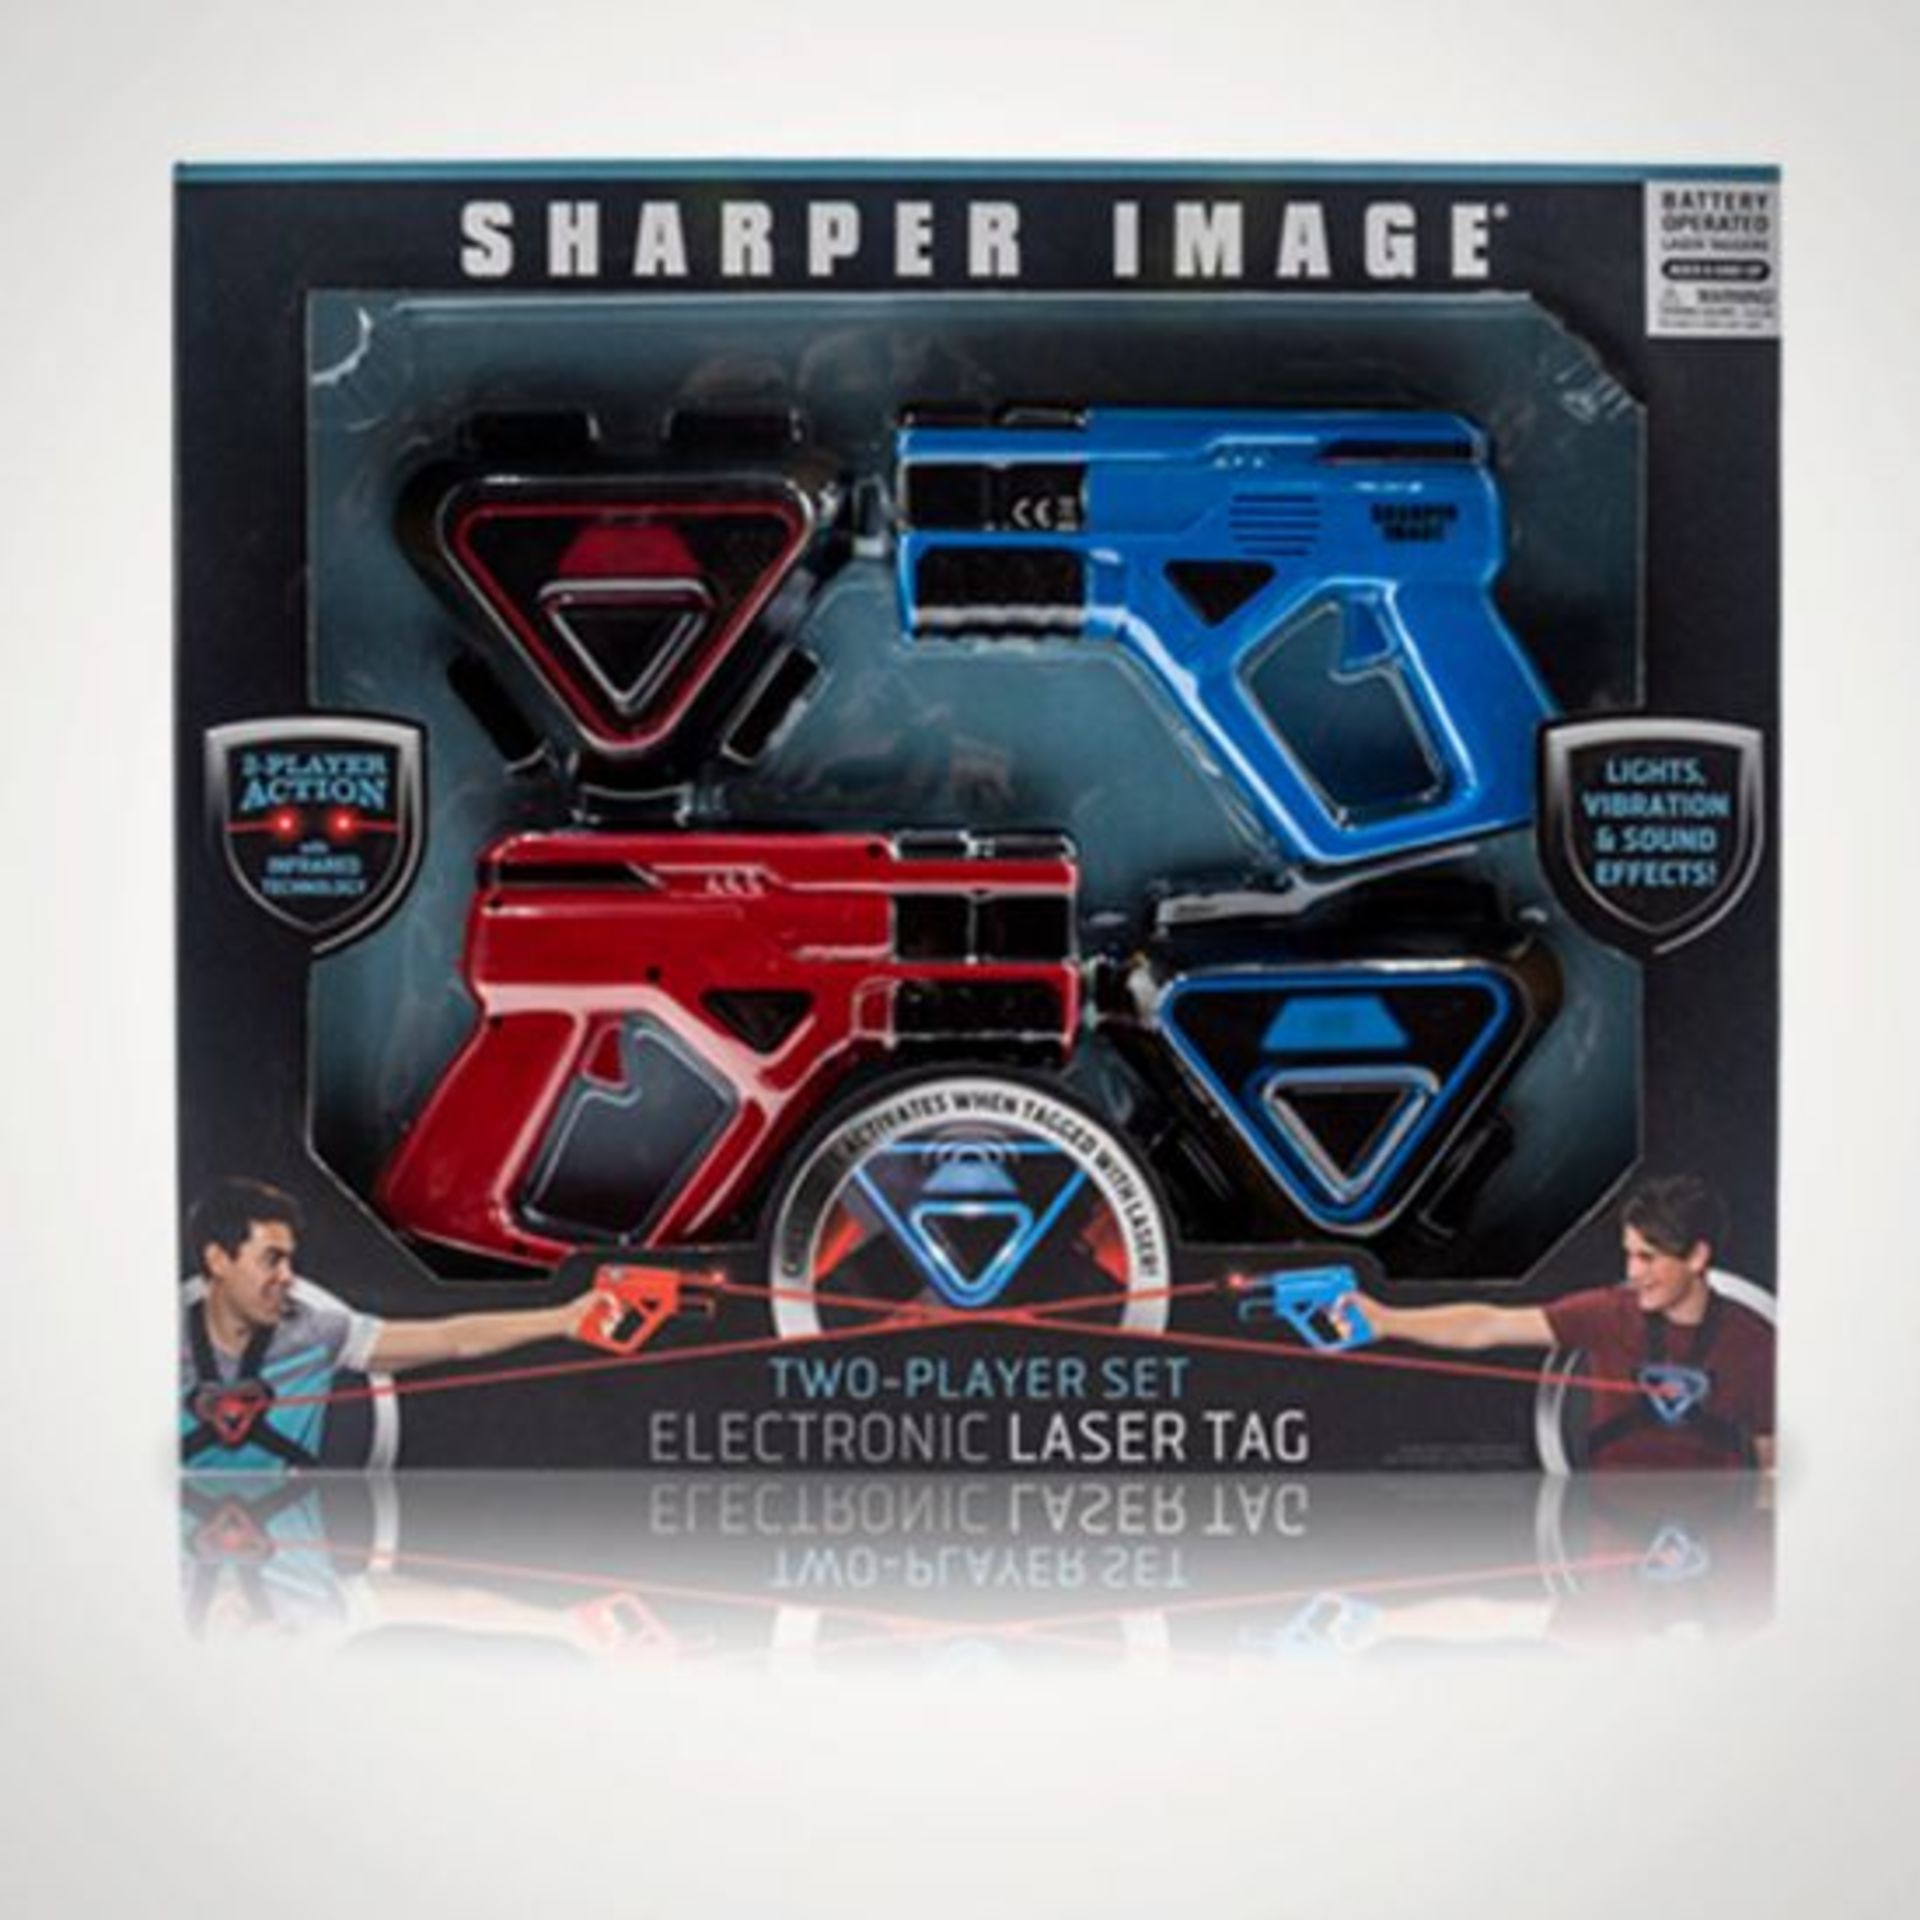 (5K) 17x Items. 1x Sharper Image Two Player Set Electronic Space Laser Tag. 1x Construct & Create...